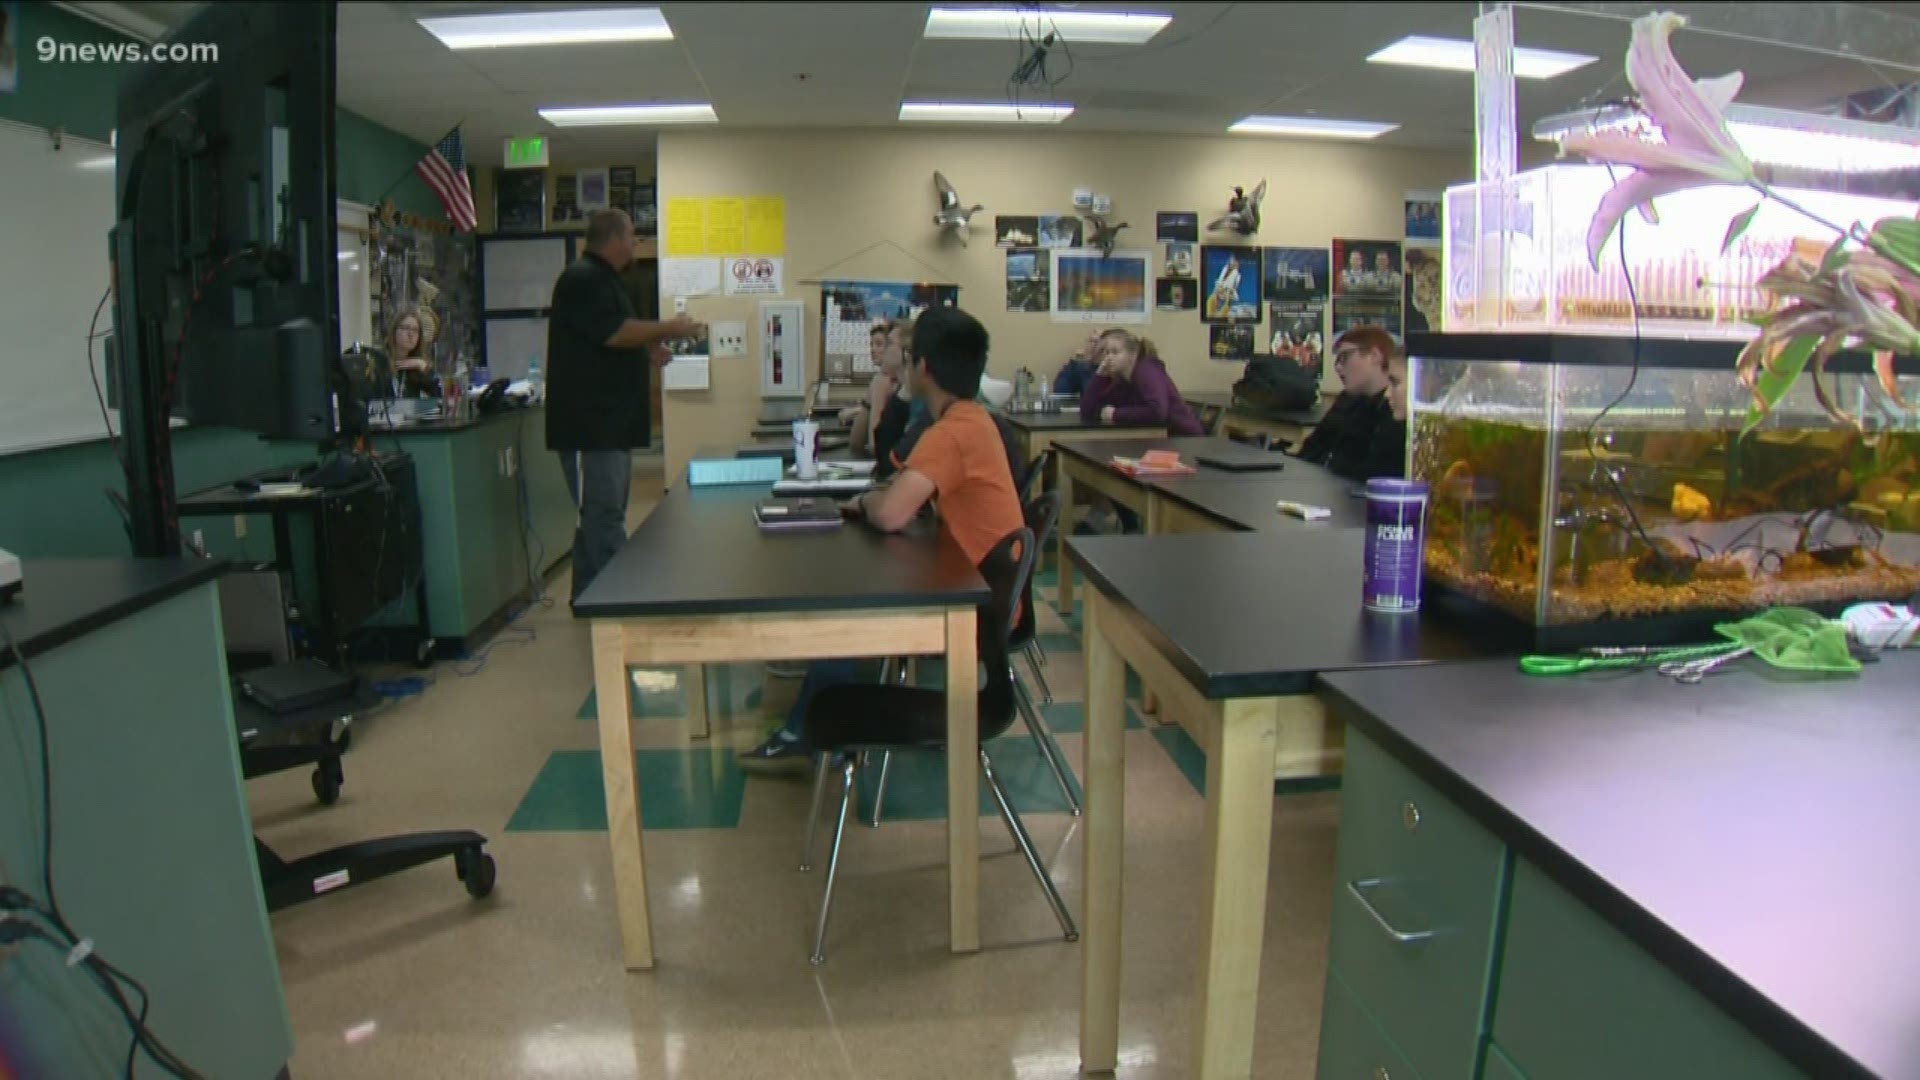 Our Byron Reed shows us how Cañon City High School won excellence in STEM education with the launch of a new program.